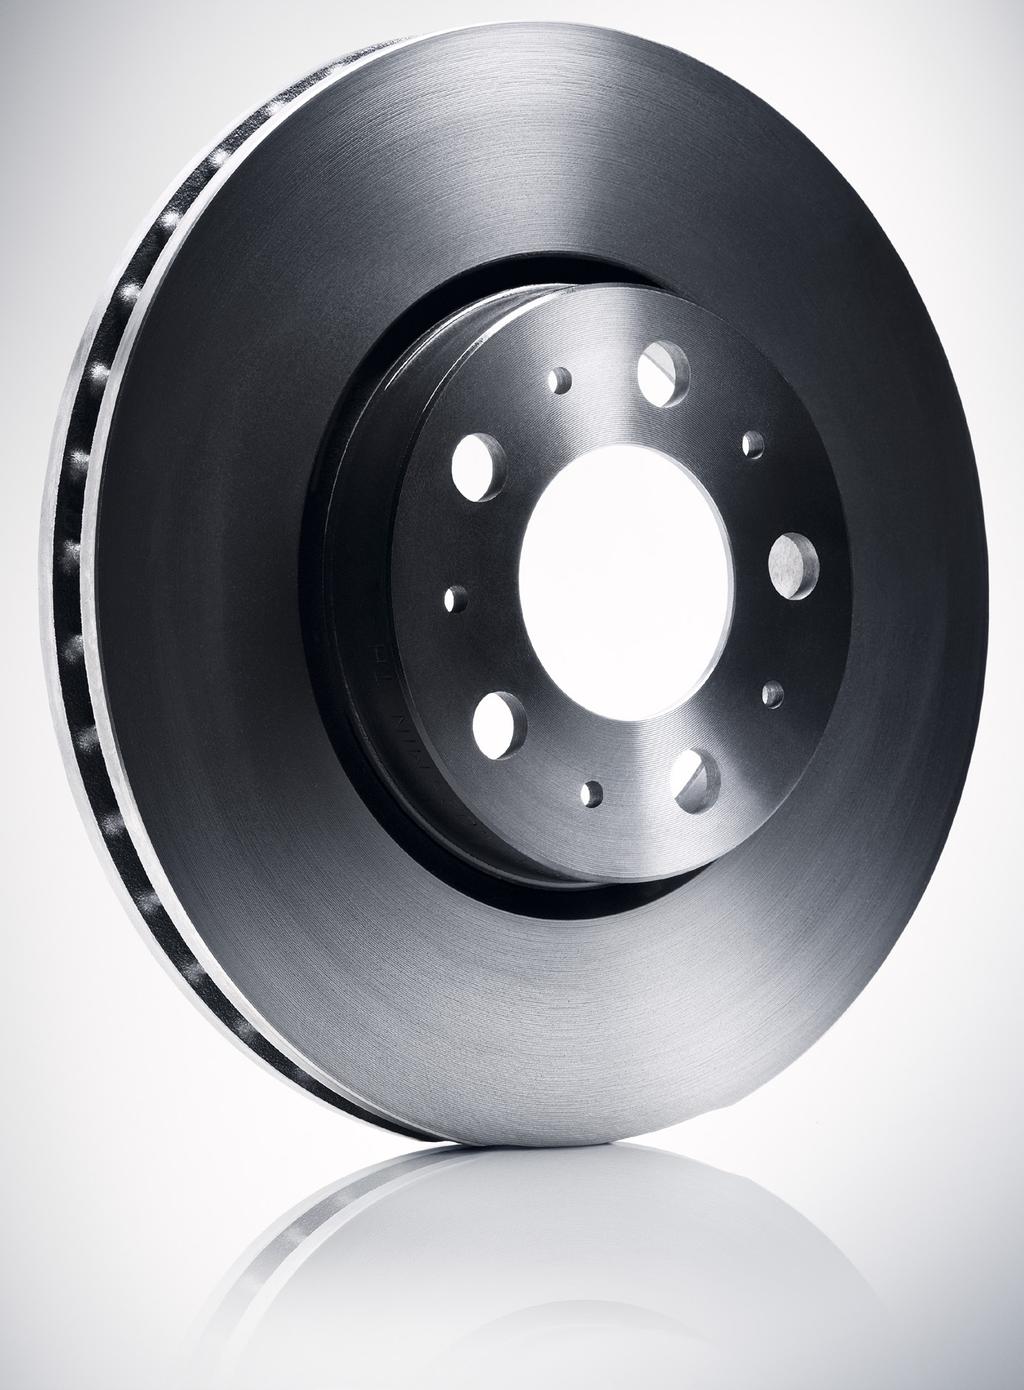 VOLVO GENUINE BRAKE DISCS The brake disc is a part of the complete braking system and contributes to vehicle braking by transferring kinetic energy into heat via friction between the disc and brake